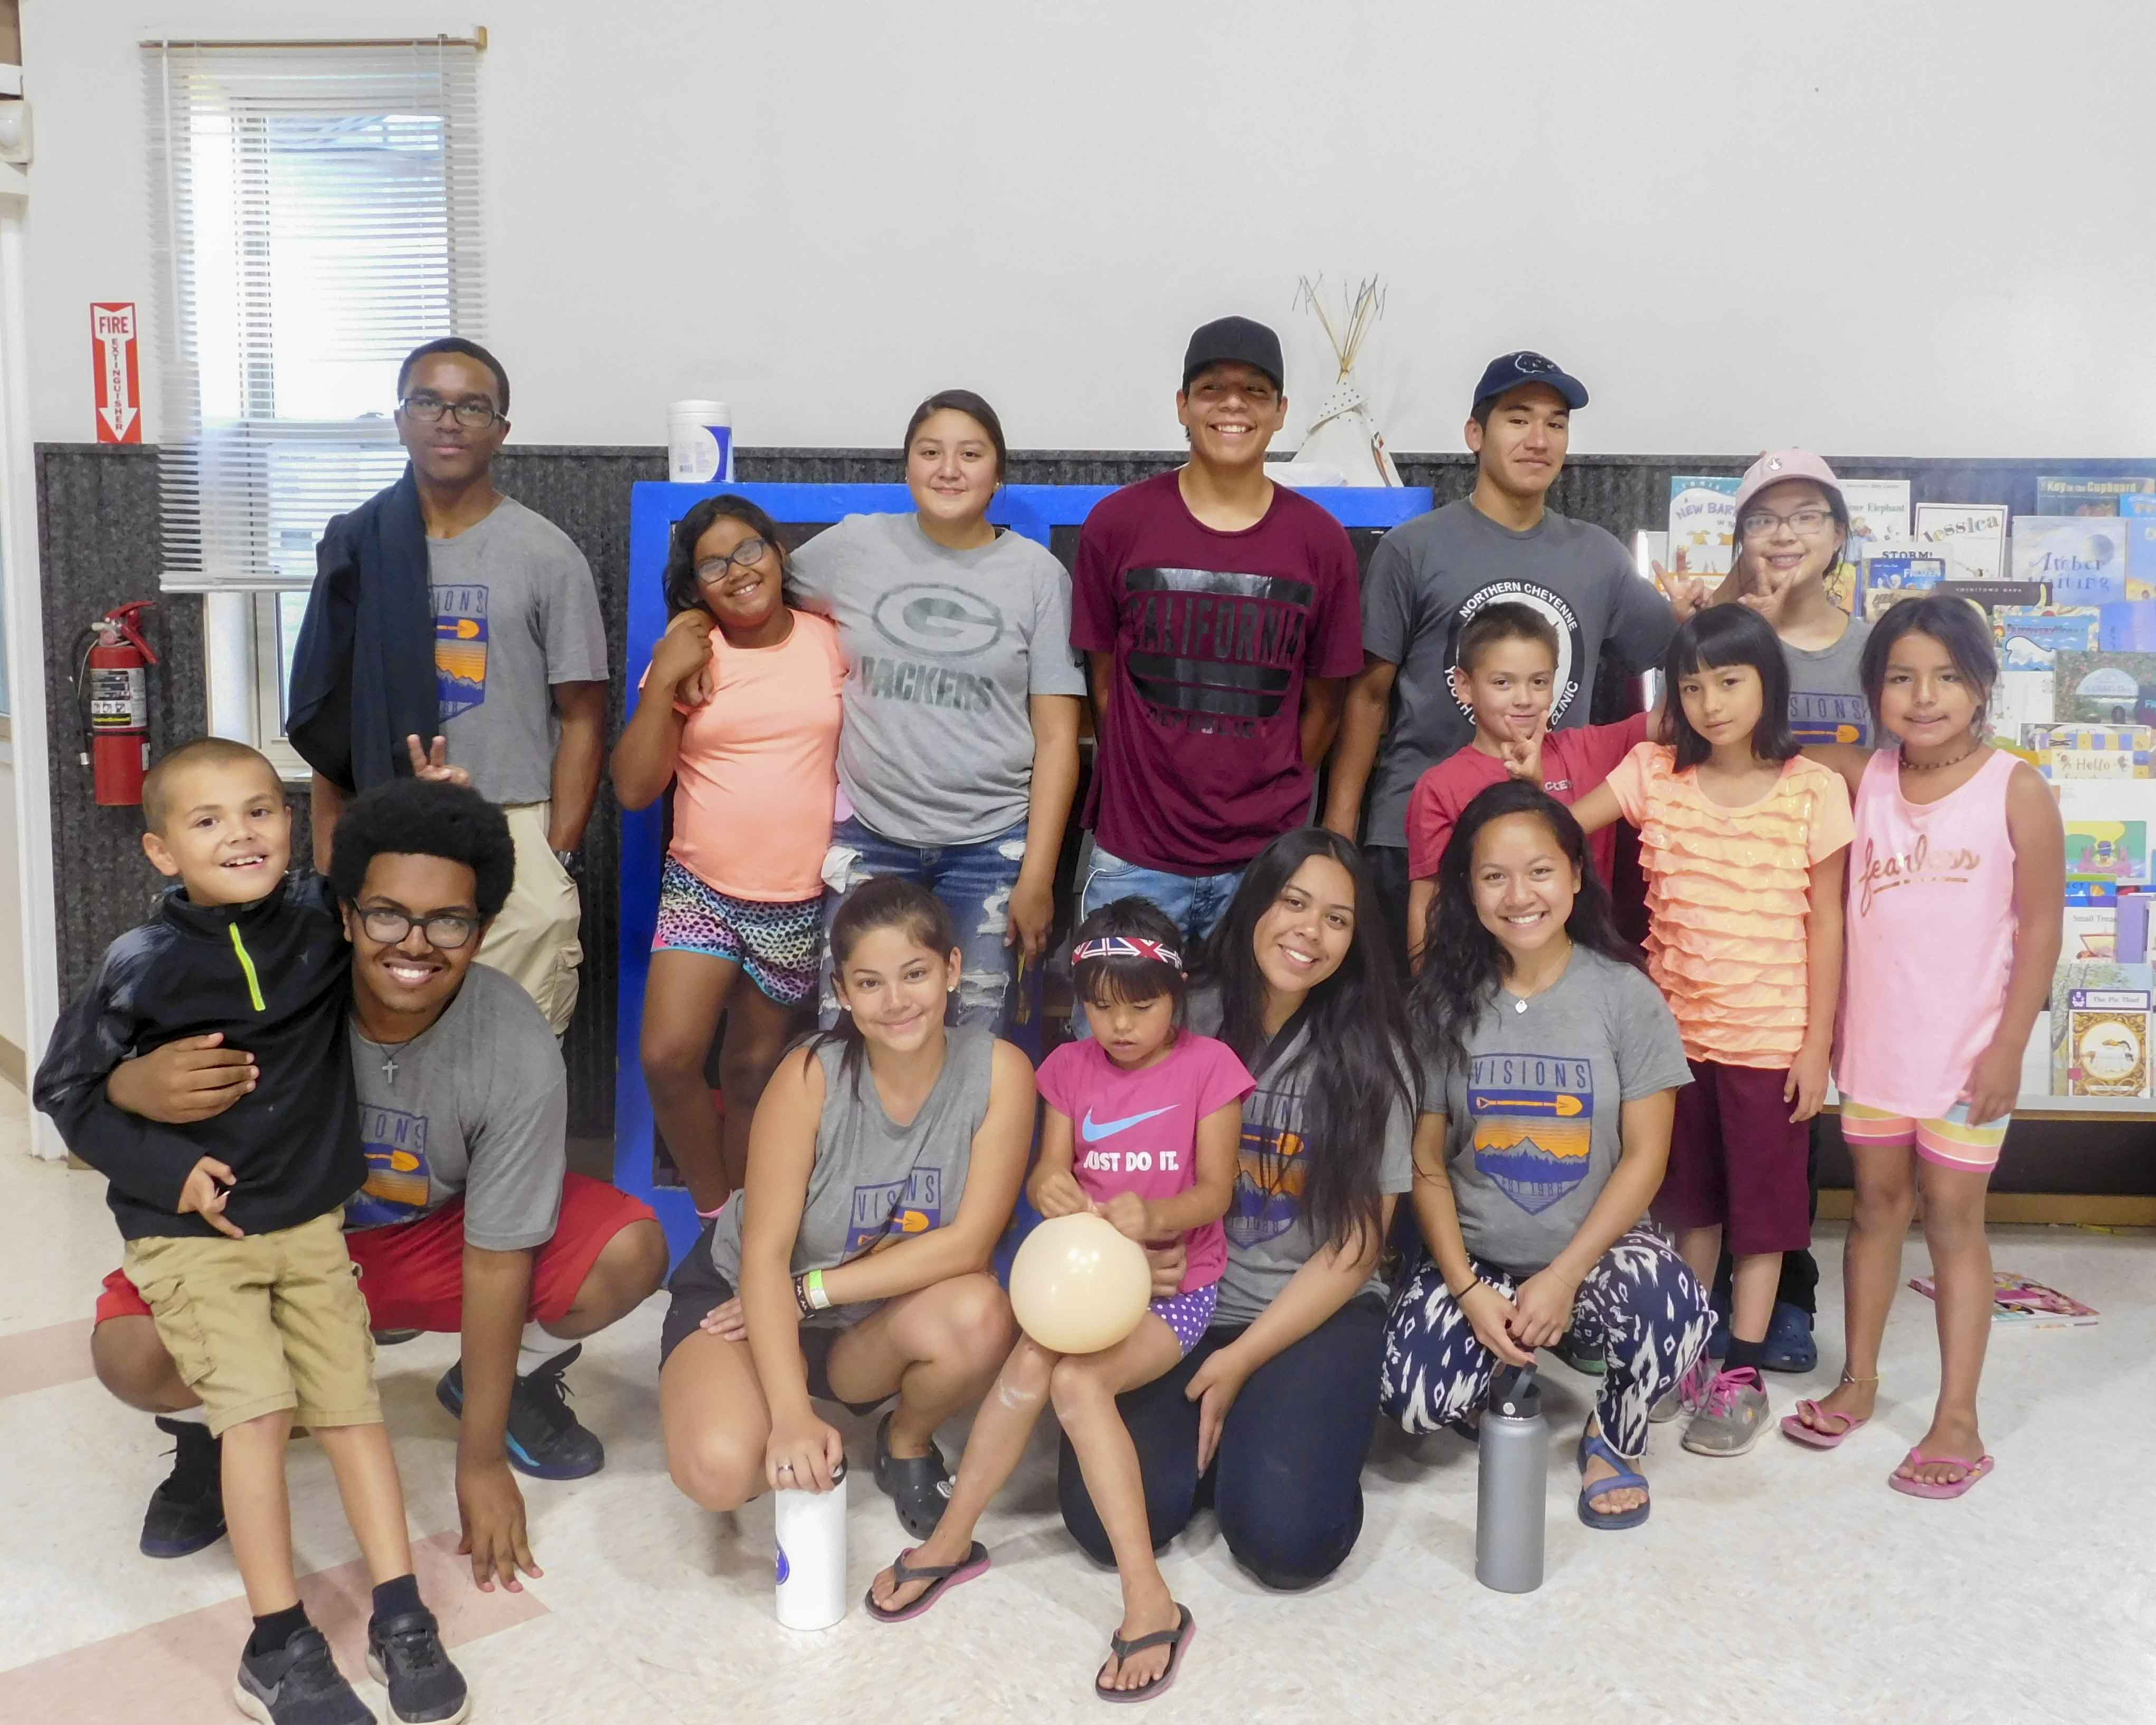 Teen volunteers stand with local community members and children at day camp on community service trips to the Northern Cheyenne